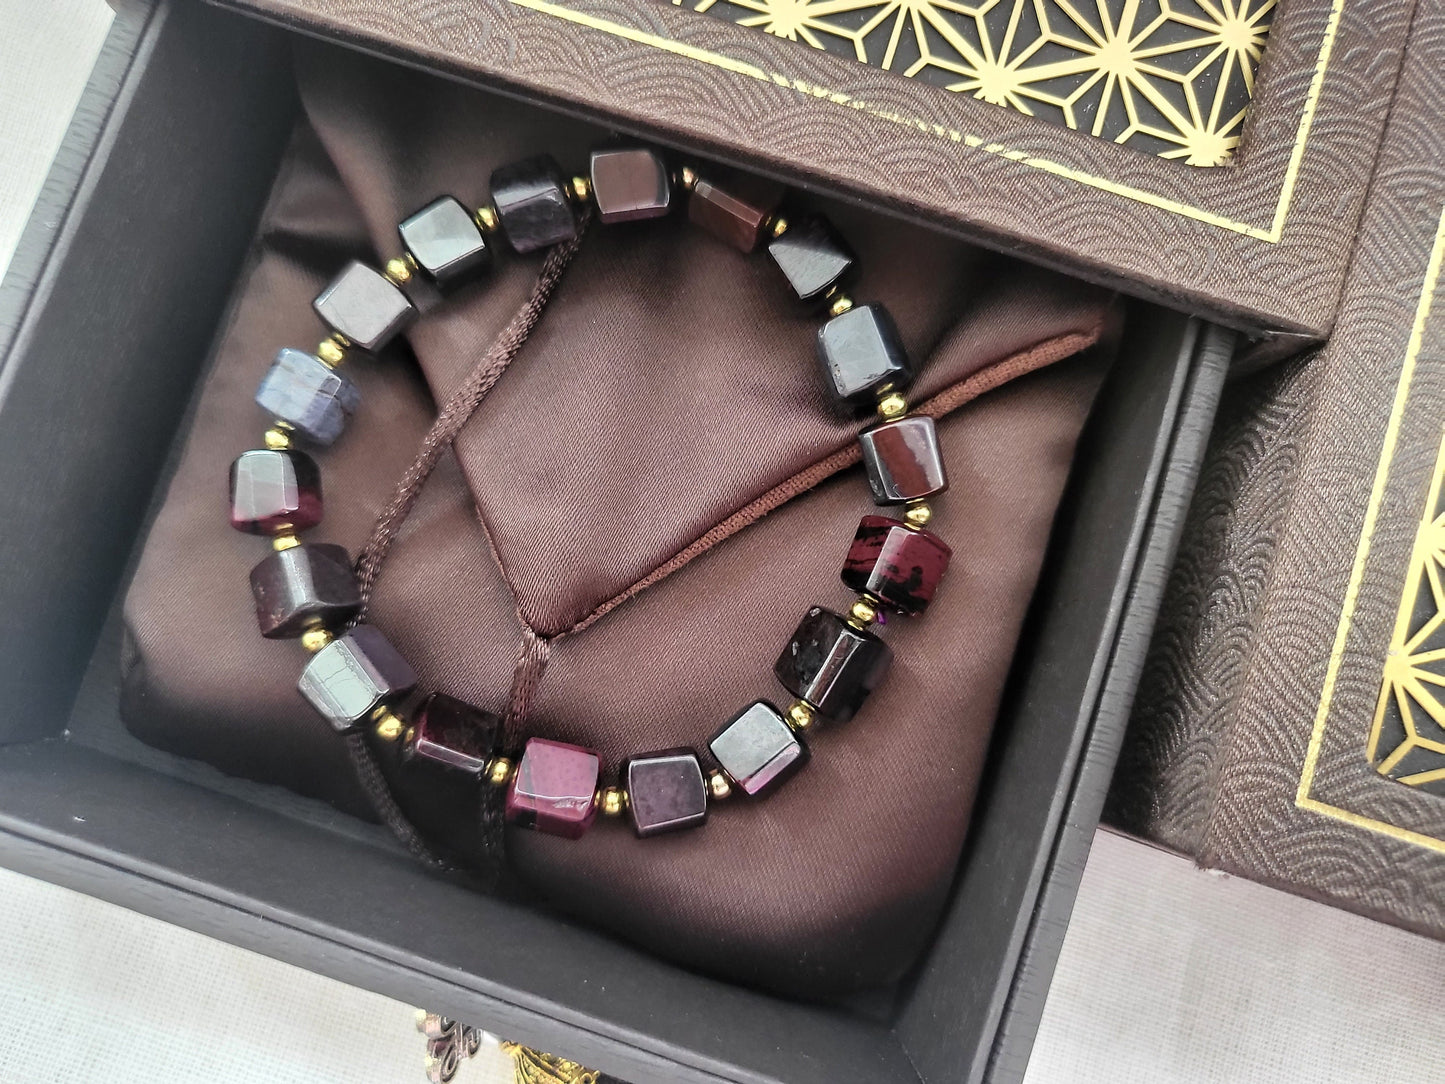 Sugilite Natural Reddish Stone Square Bead Bracelet with Gold Beads